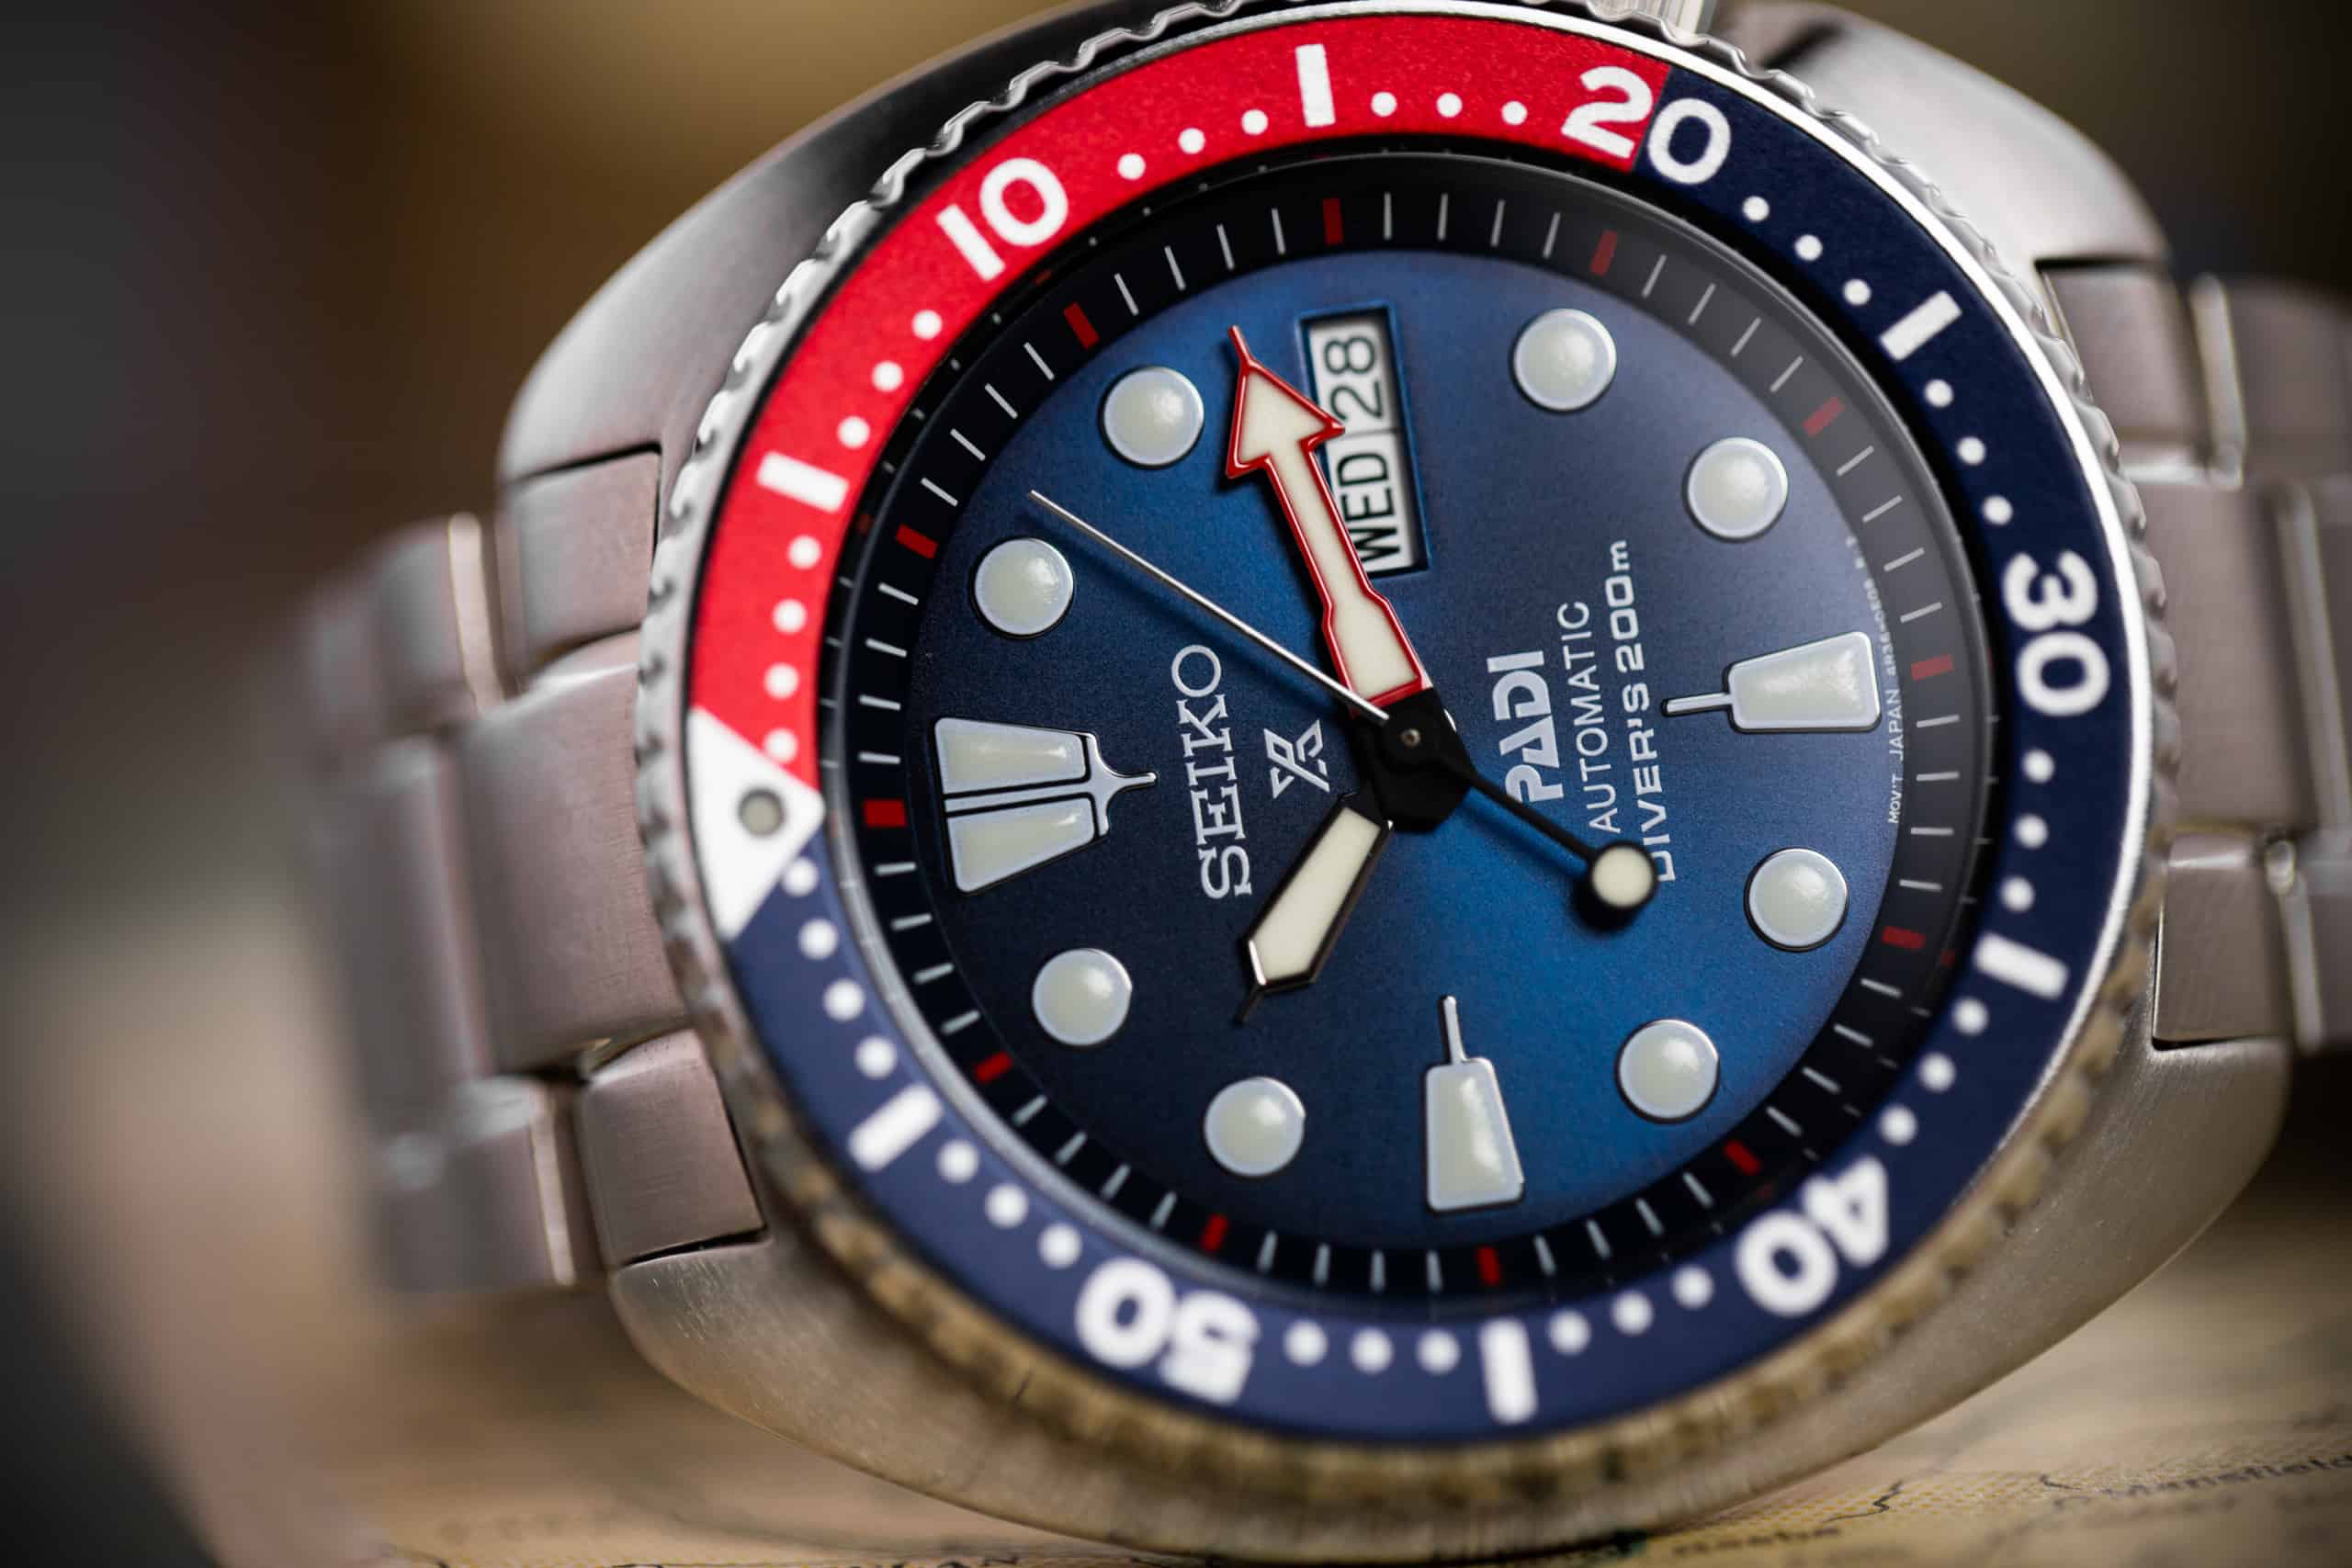 Worn & Wound - Deep Dive: The Evolution of the Seiko Turtle